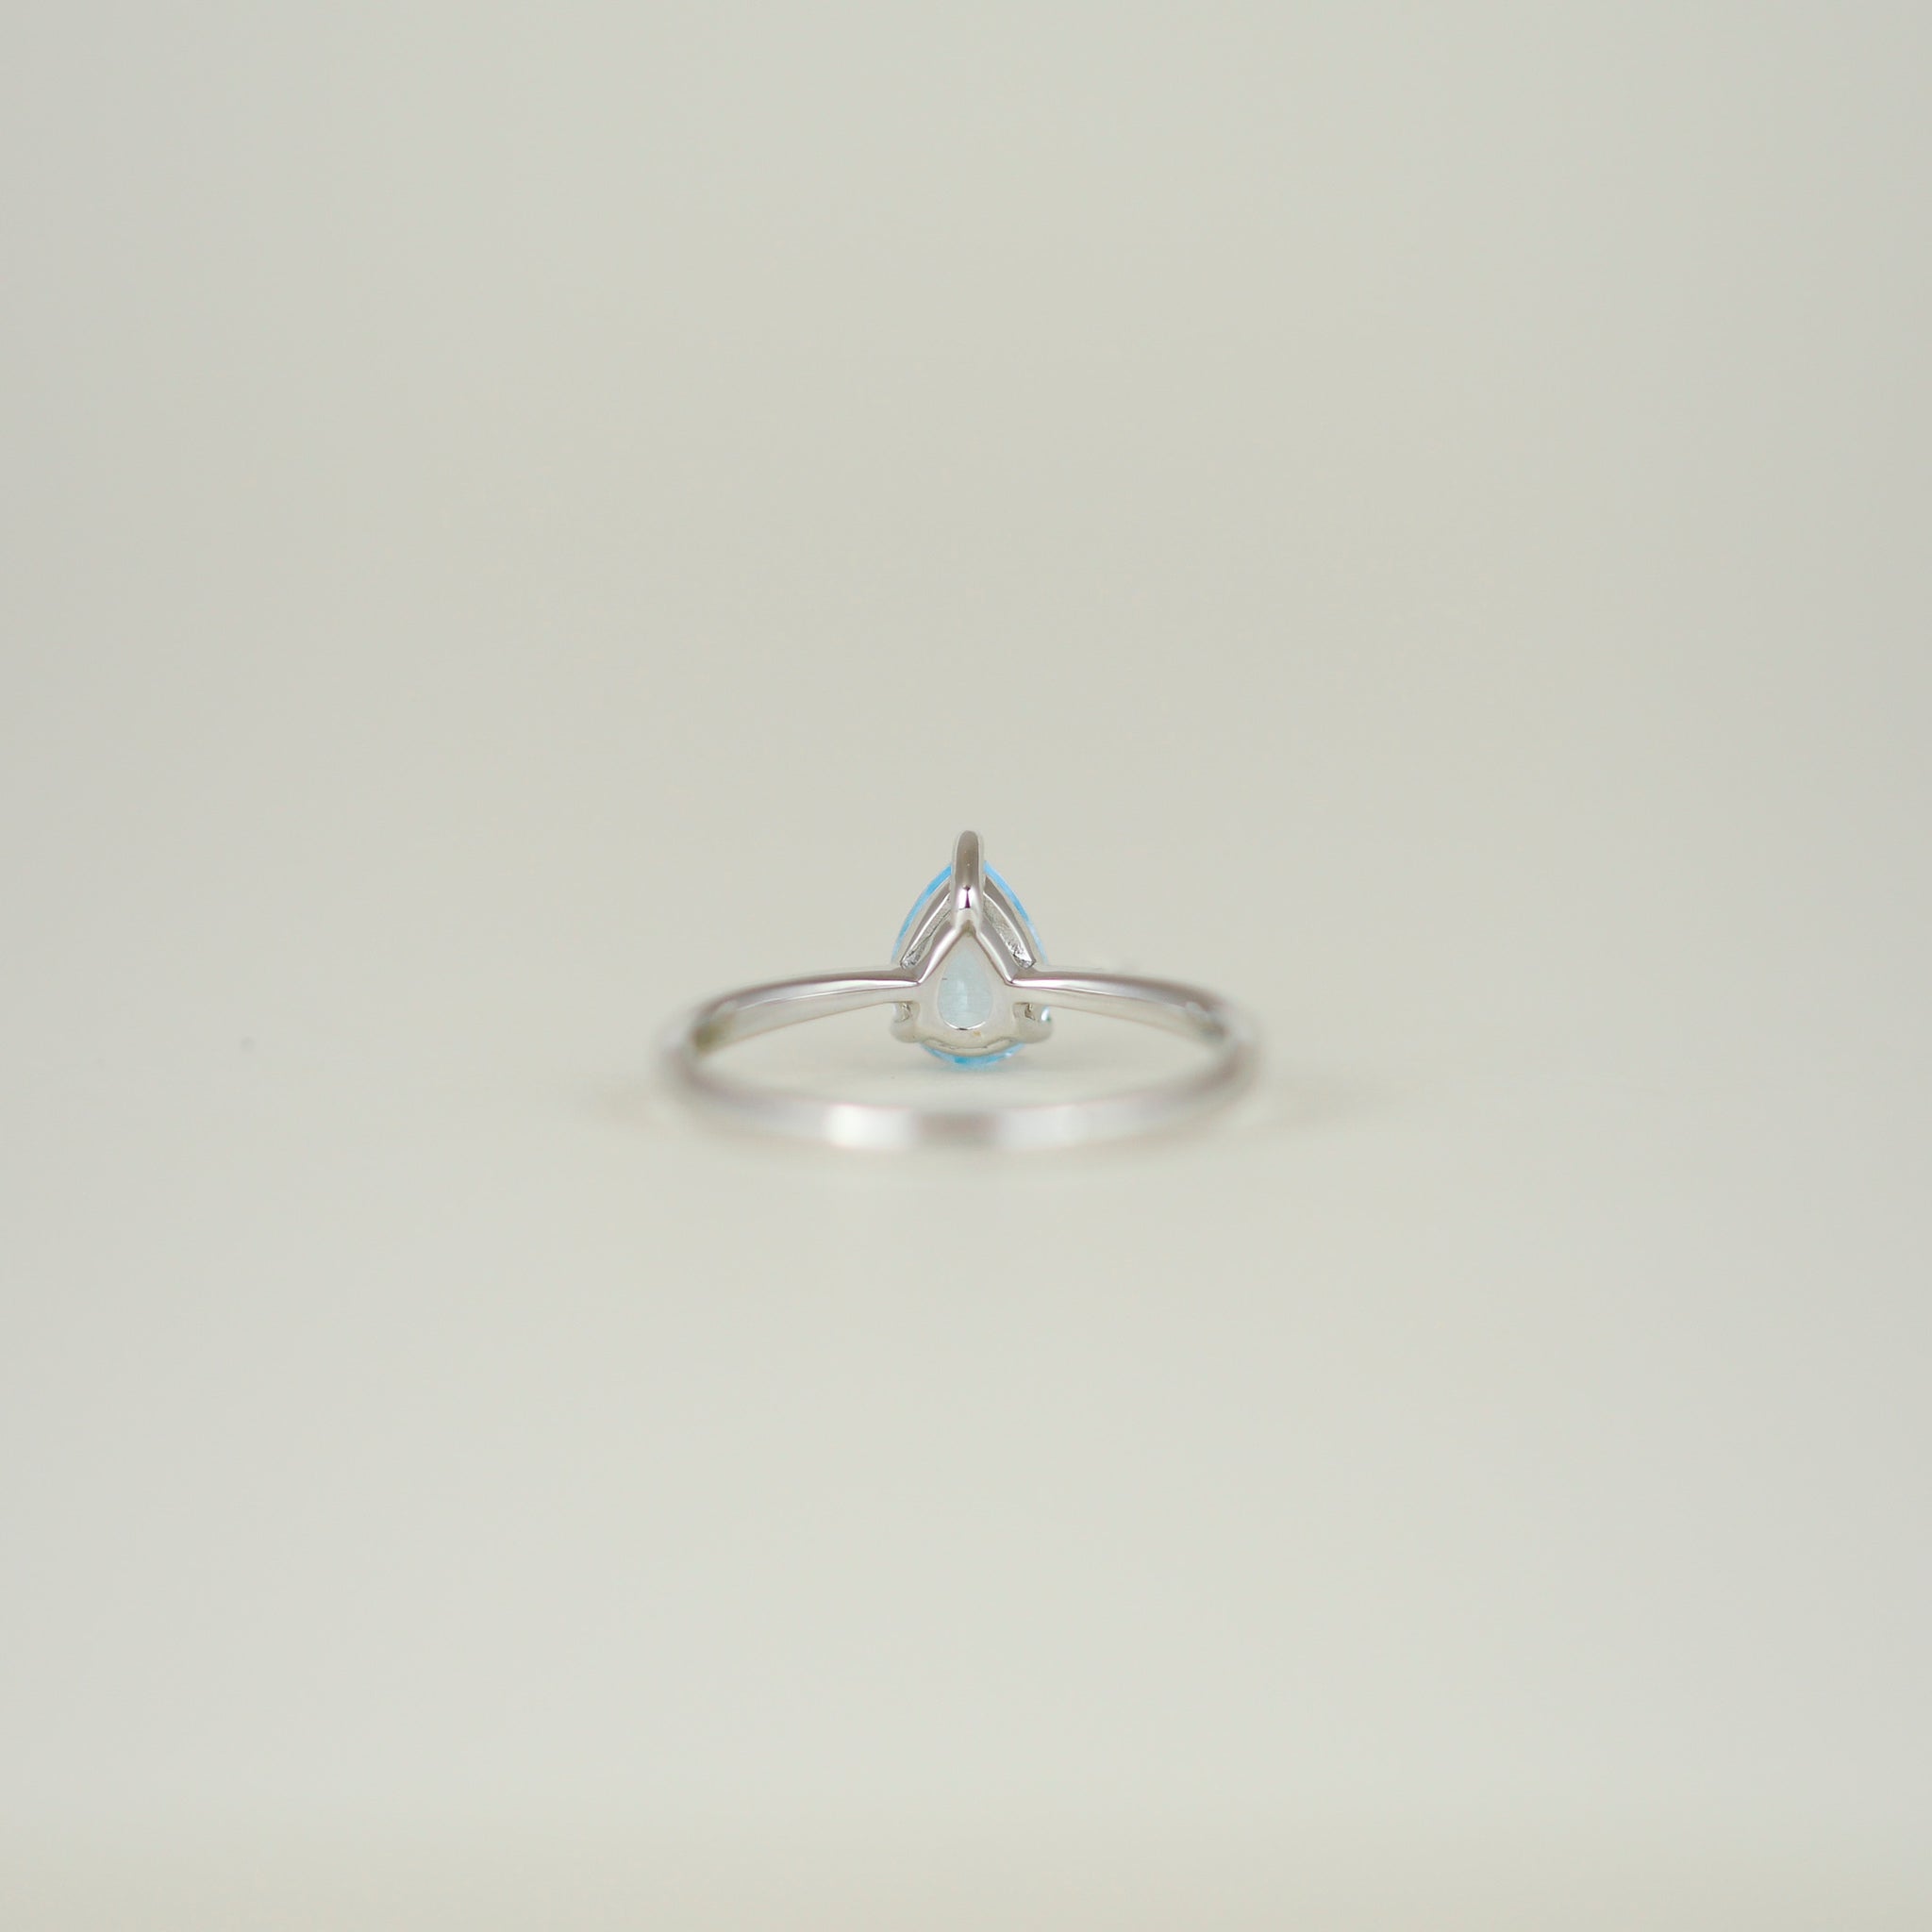 9ct White Gold 0.74ct Pear-Cut Blue Topaz Ring